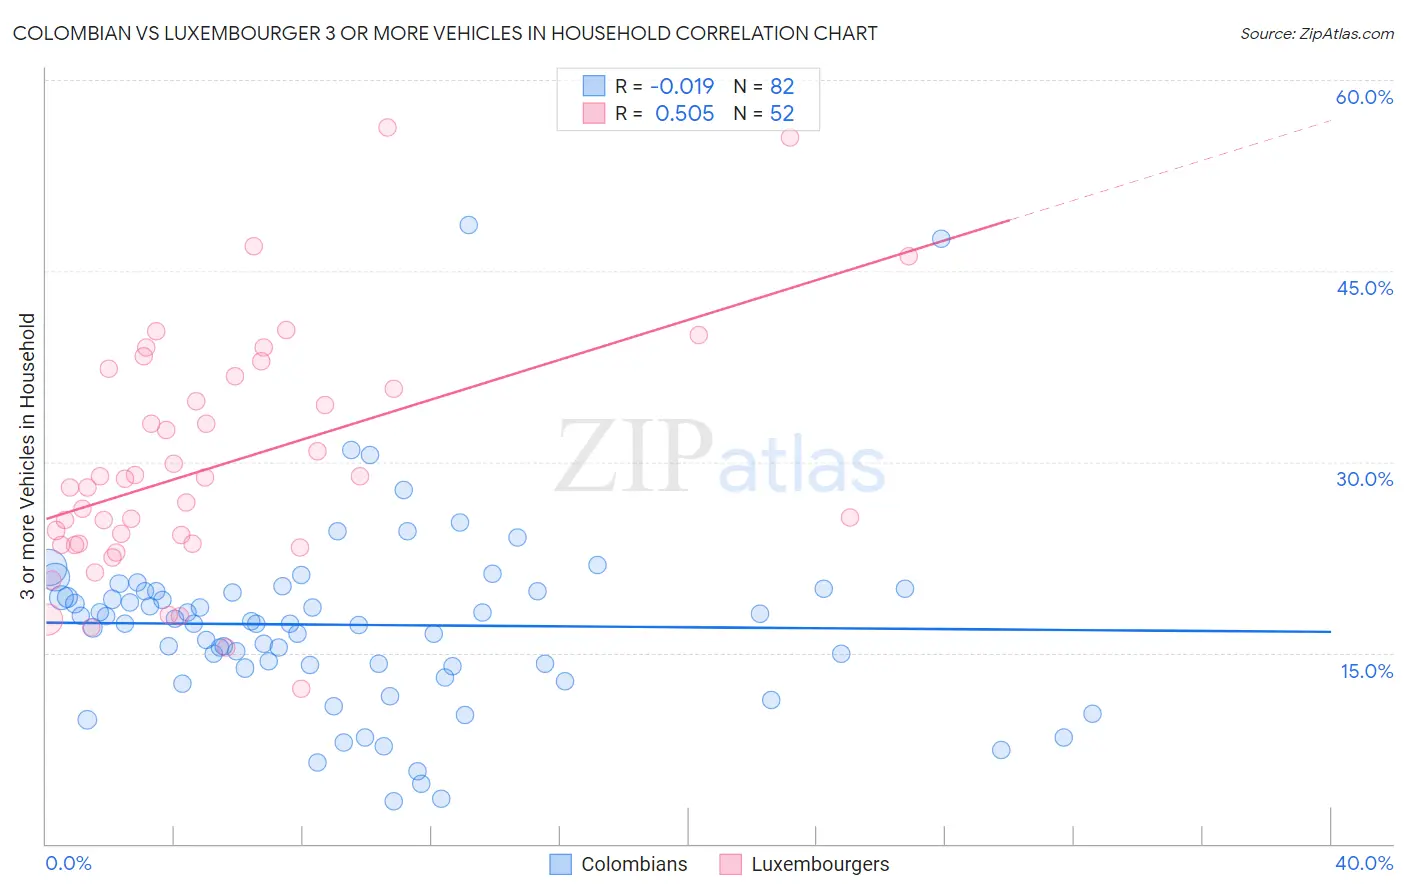 Colombian vs Luxembourger 3 or more Vehicles in Household